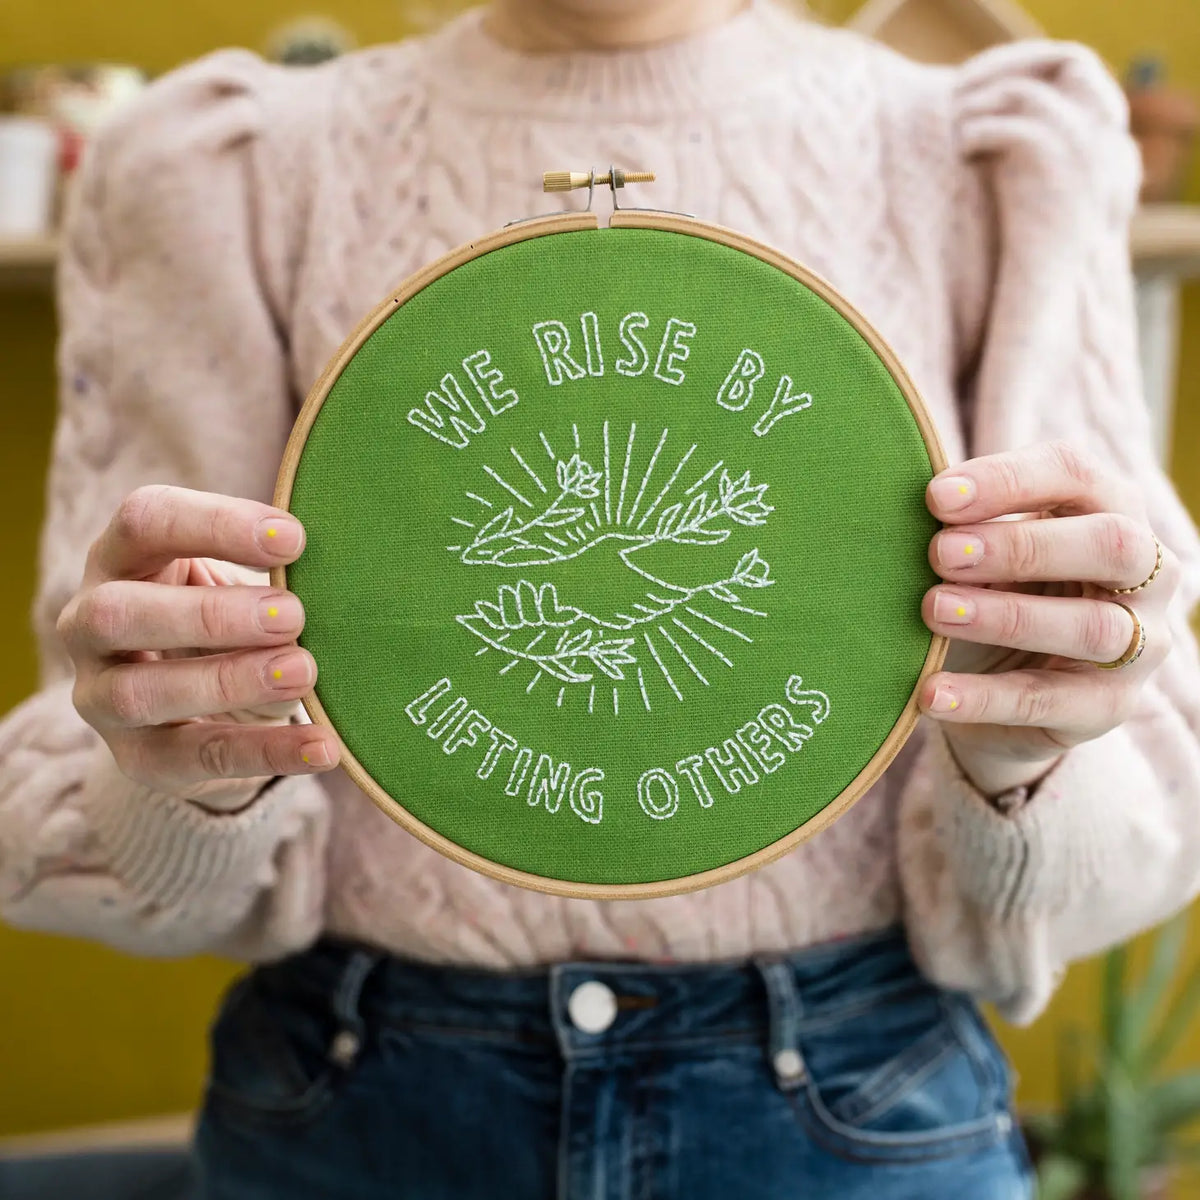 We Rise By Lifting Others Embroidery Kit in Green